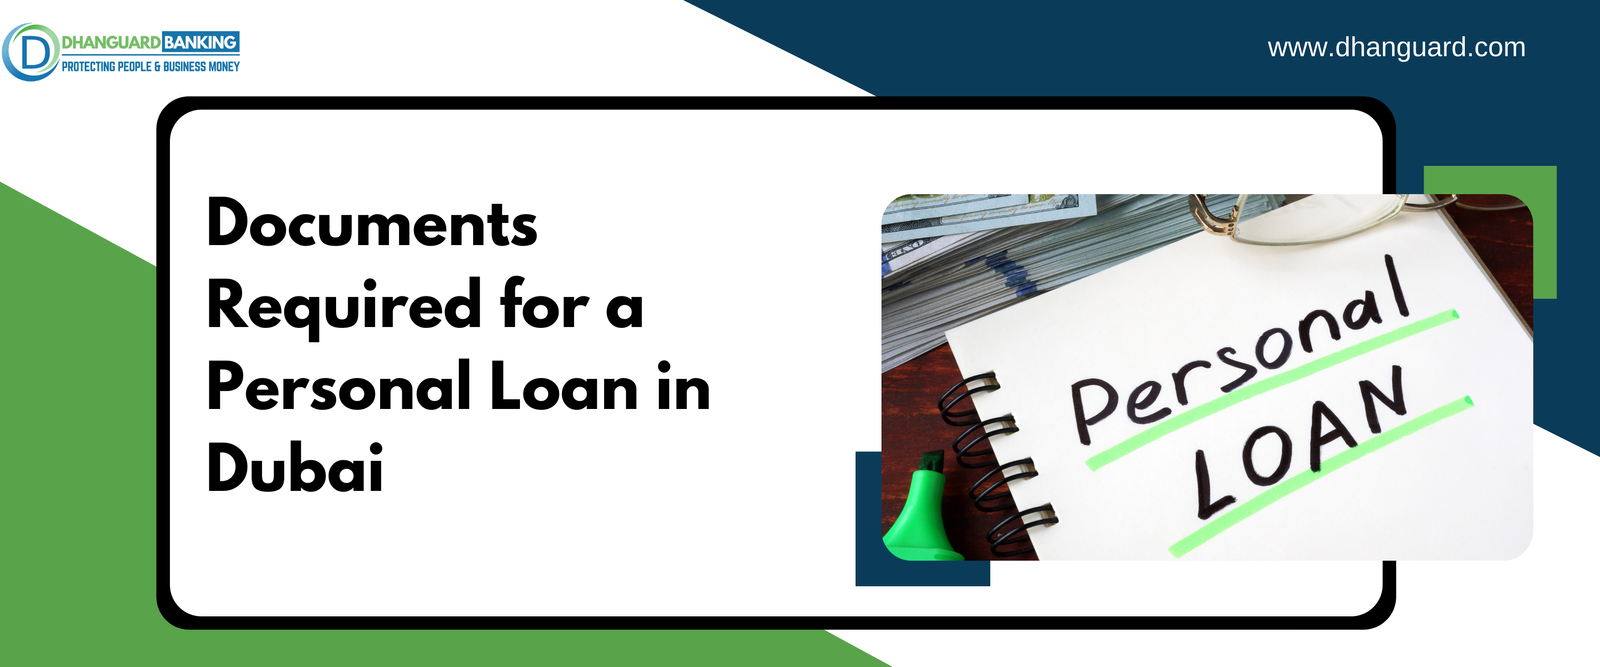 Documents Required for a Personal Loan in Dubai and Its Eligibility Criteria | Dhanguard